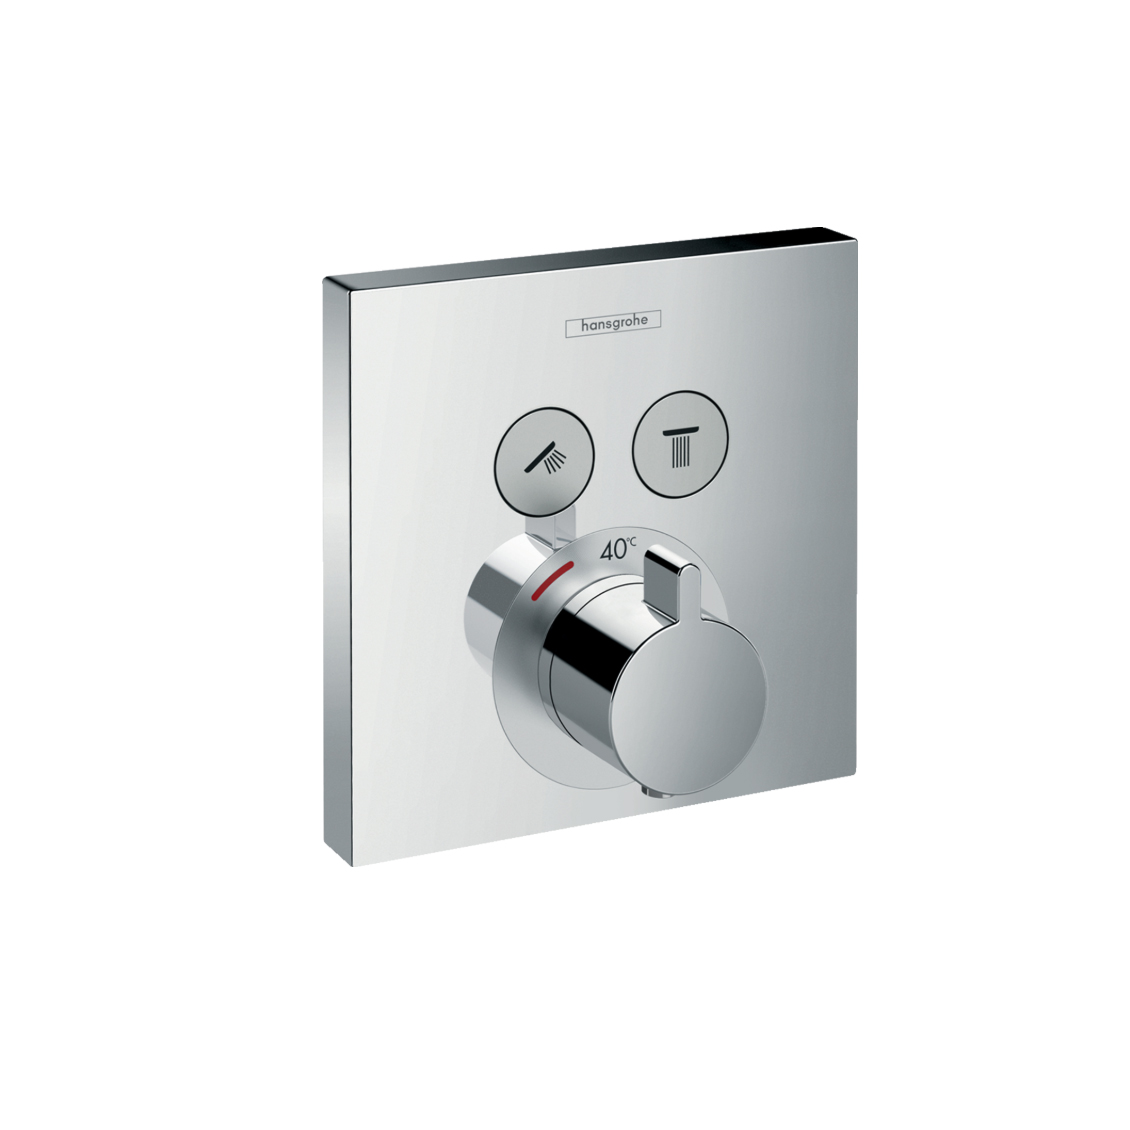 An image of Hansgrohe ShowerSelect Thermostatic Mixer For Concealed Installation For 2 Outle...